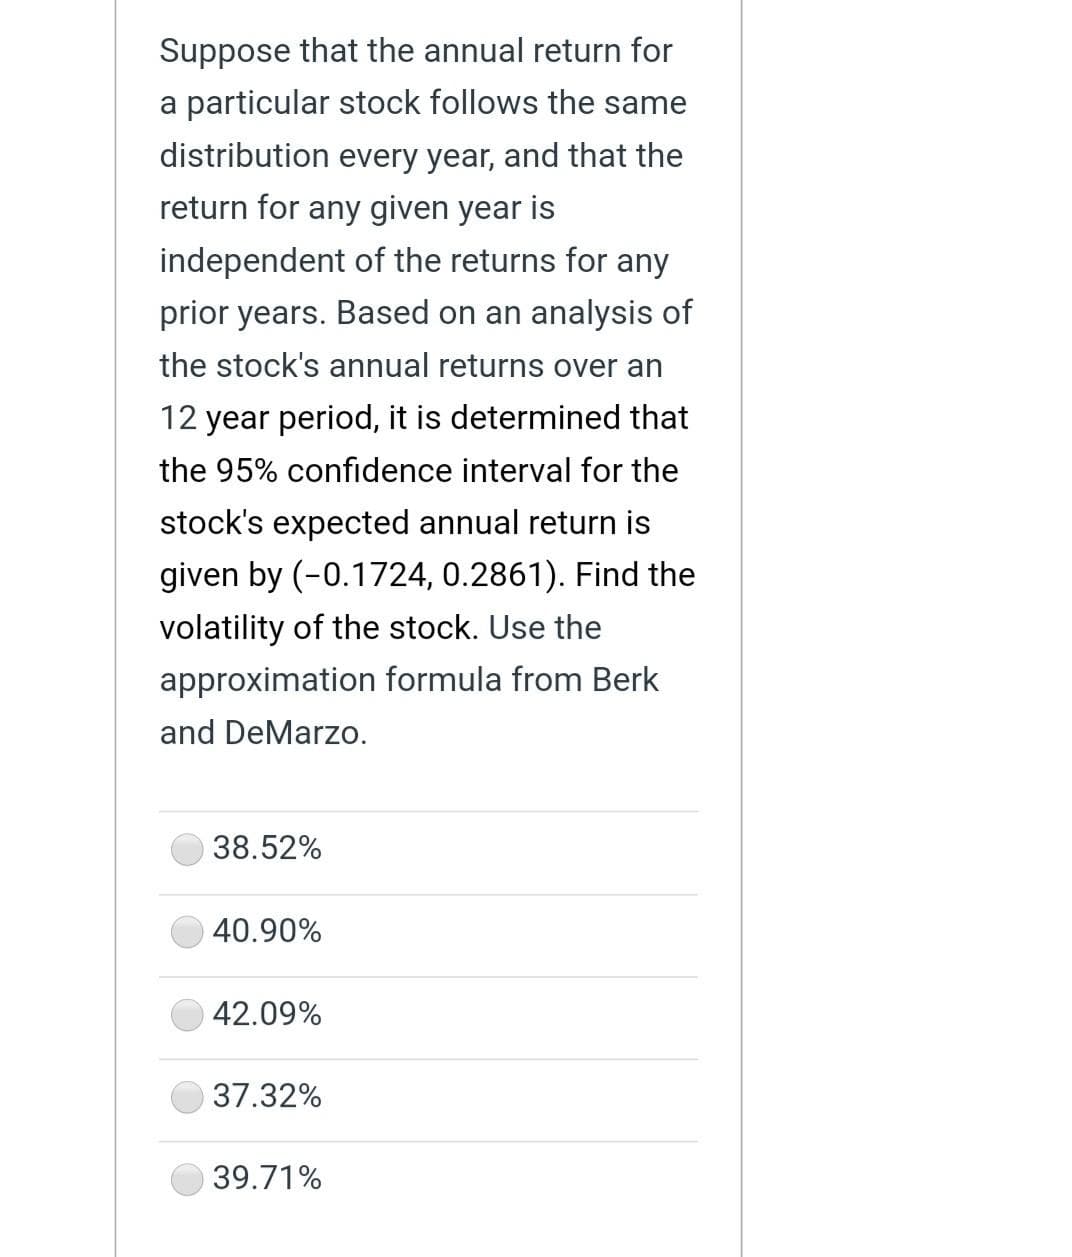 Suppose that the annual return for
particular stock follows the same
distribution every year, and that the
return for any given year is
independent of the returns for any
prior years. Based on an analysis of
the stock's annual returns over an
12 year period, it is determined that
the 95% confidence interval for the
stock's expected annual return is
given by (-0.1724, 0.2861). Find the
volatility of the stock. Use the
approximation formula from Berk
and DeMarzo.
38.52%
40.90%
42.09%
37.32%
39.71%
